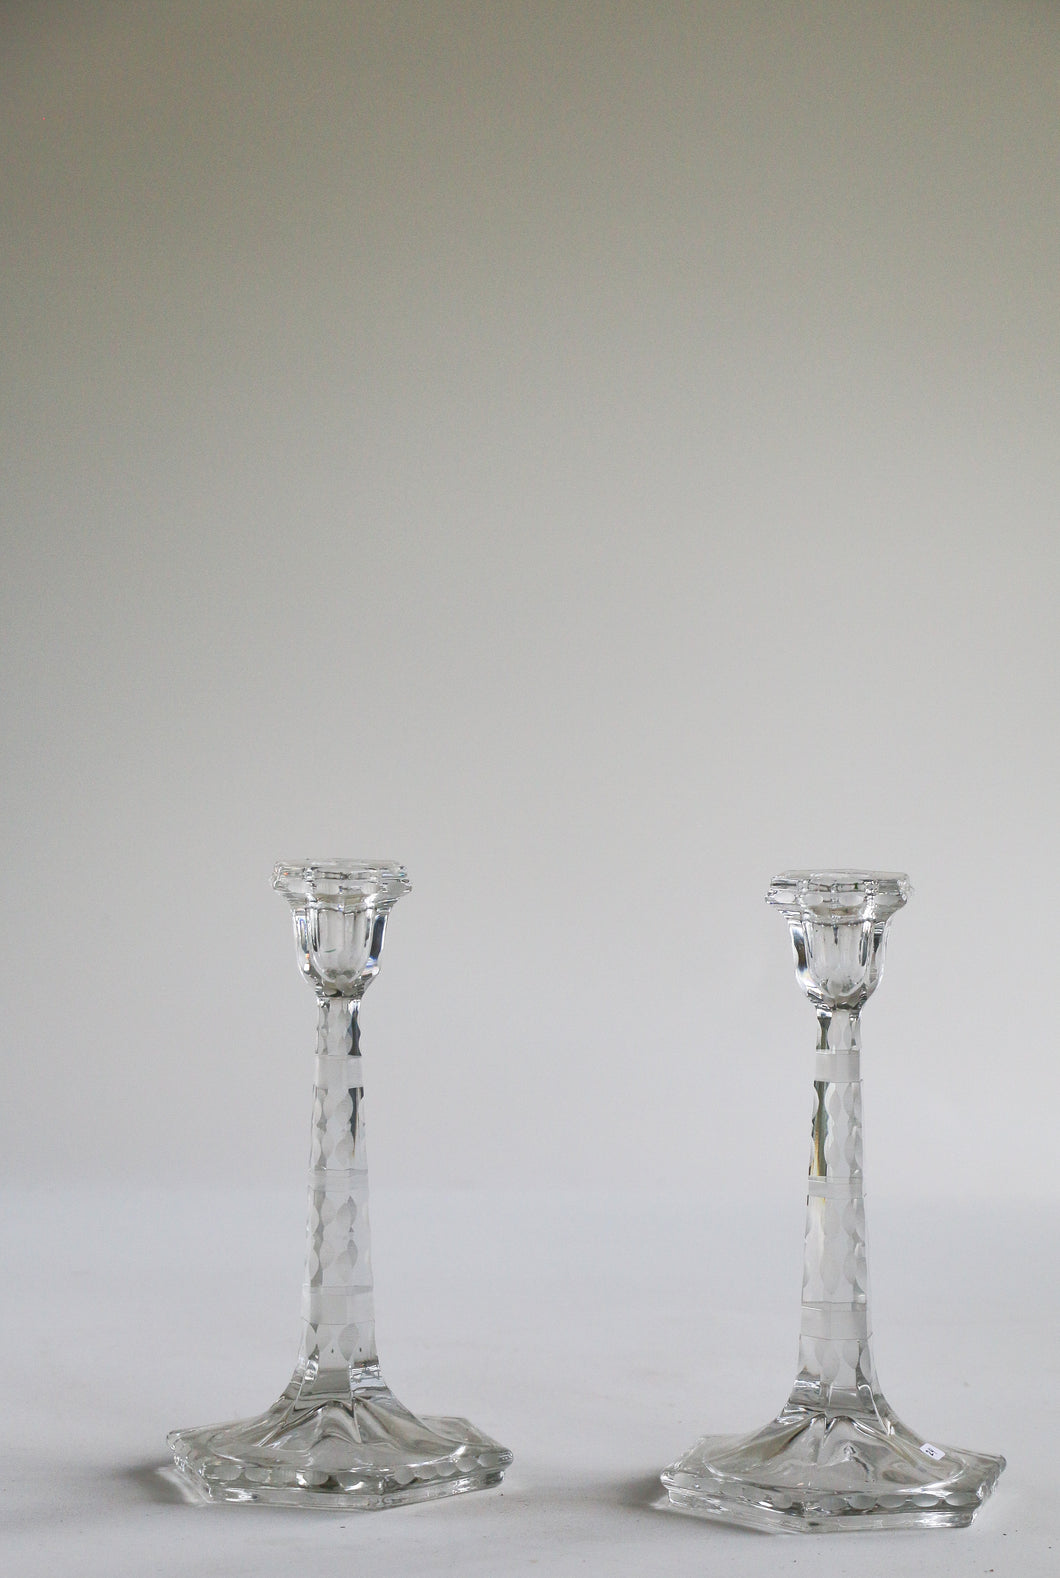 Etched Glass Candlesticks